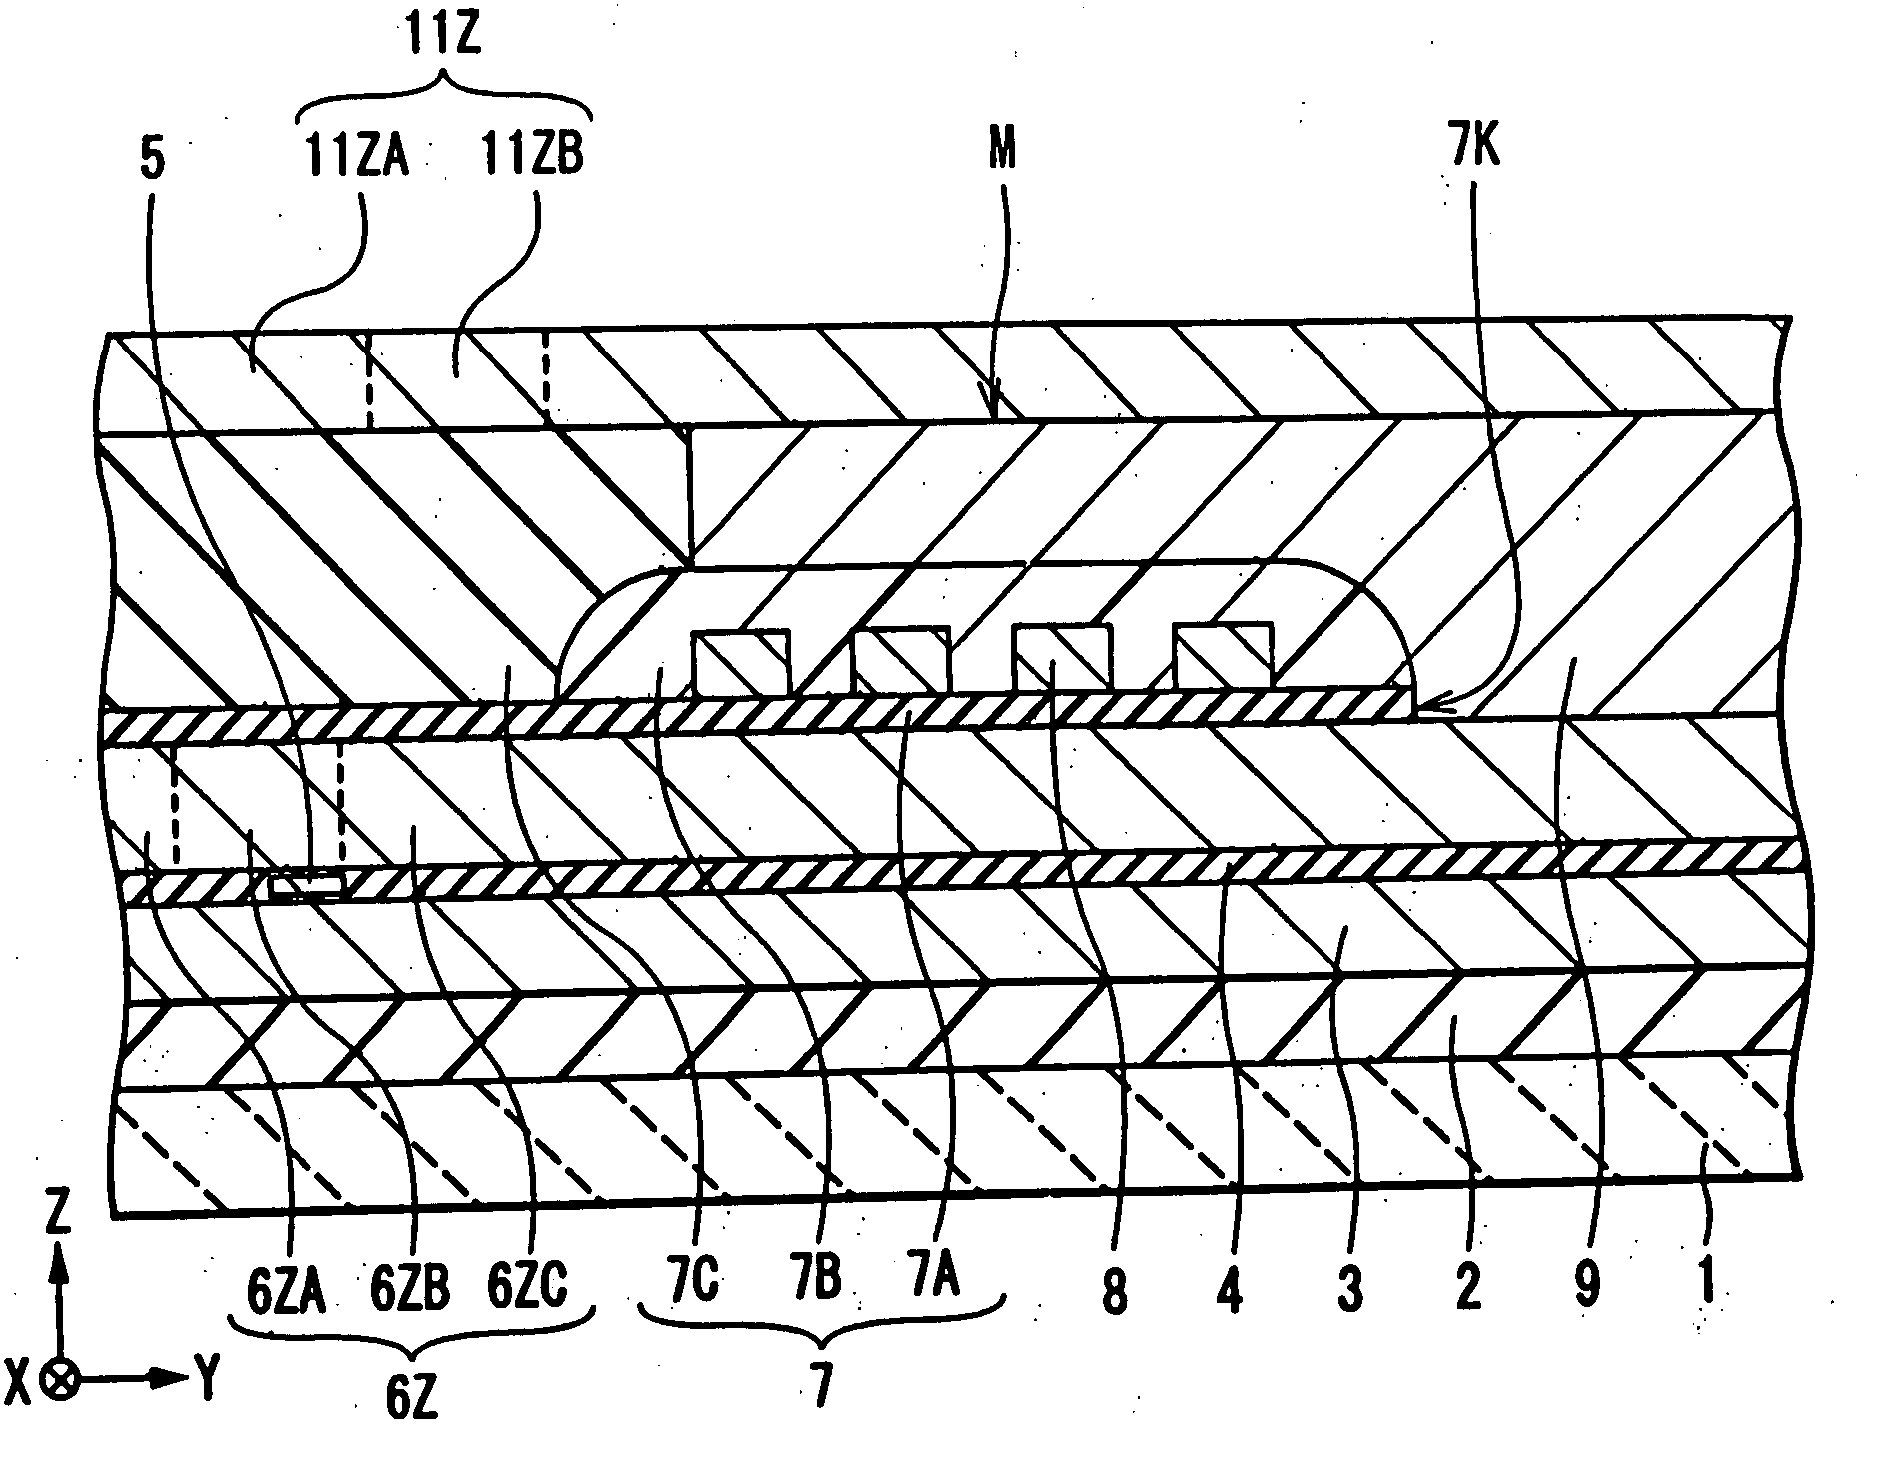 Thin film magnetic head and method of manufacturing the same